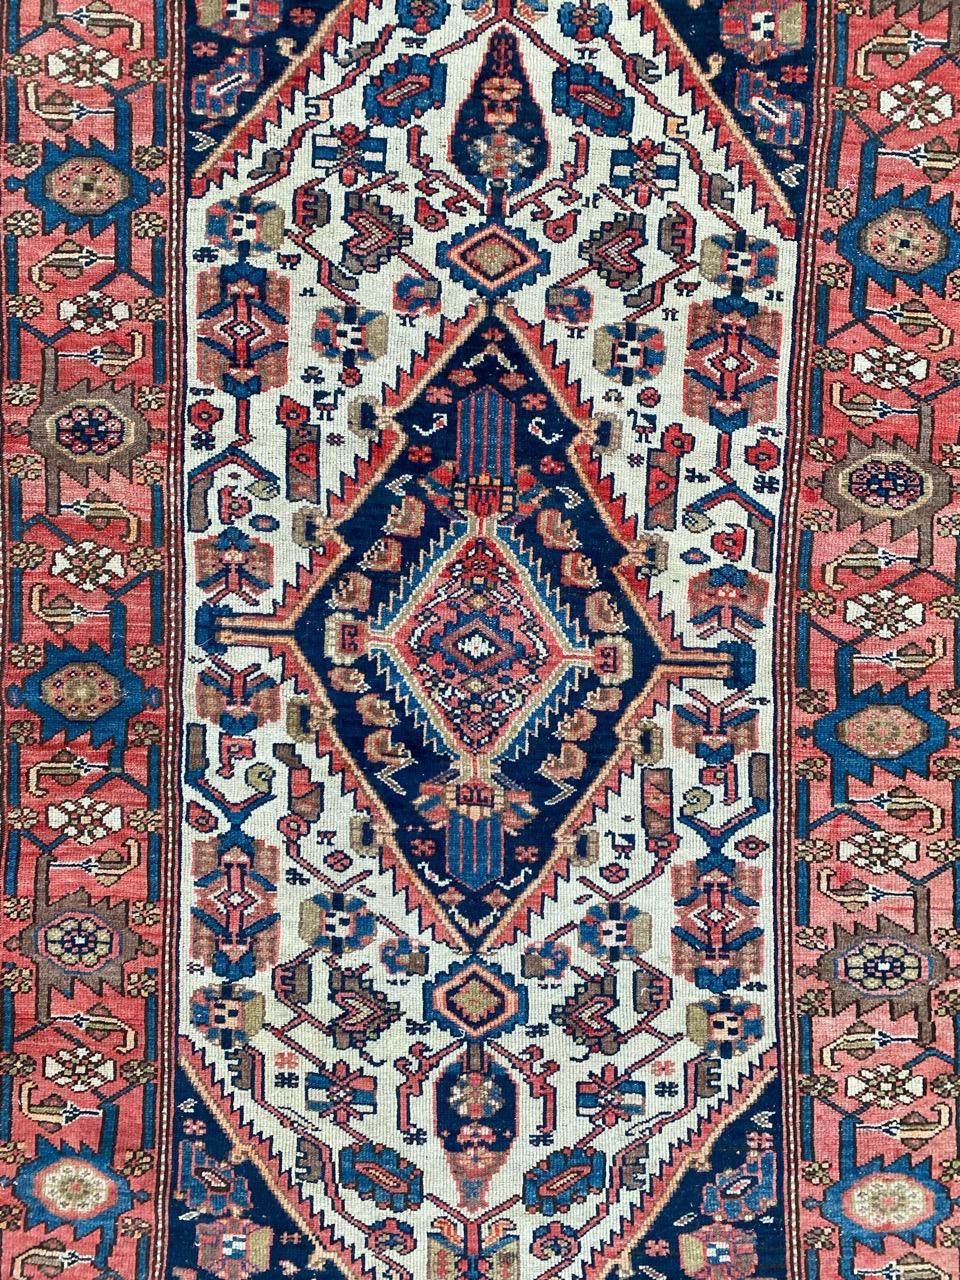 Very beautiful late 19th century Malayer rug with beautiful geometrical and stylised design and nice natural colors, entirely hand knotted with wool velvet on cotton foundation.

✨✨✨
